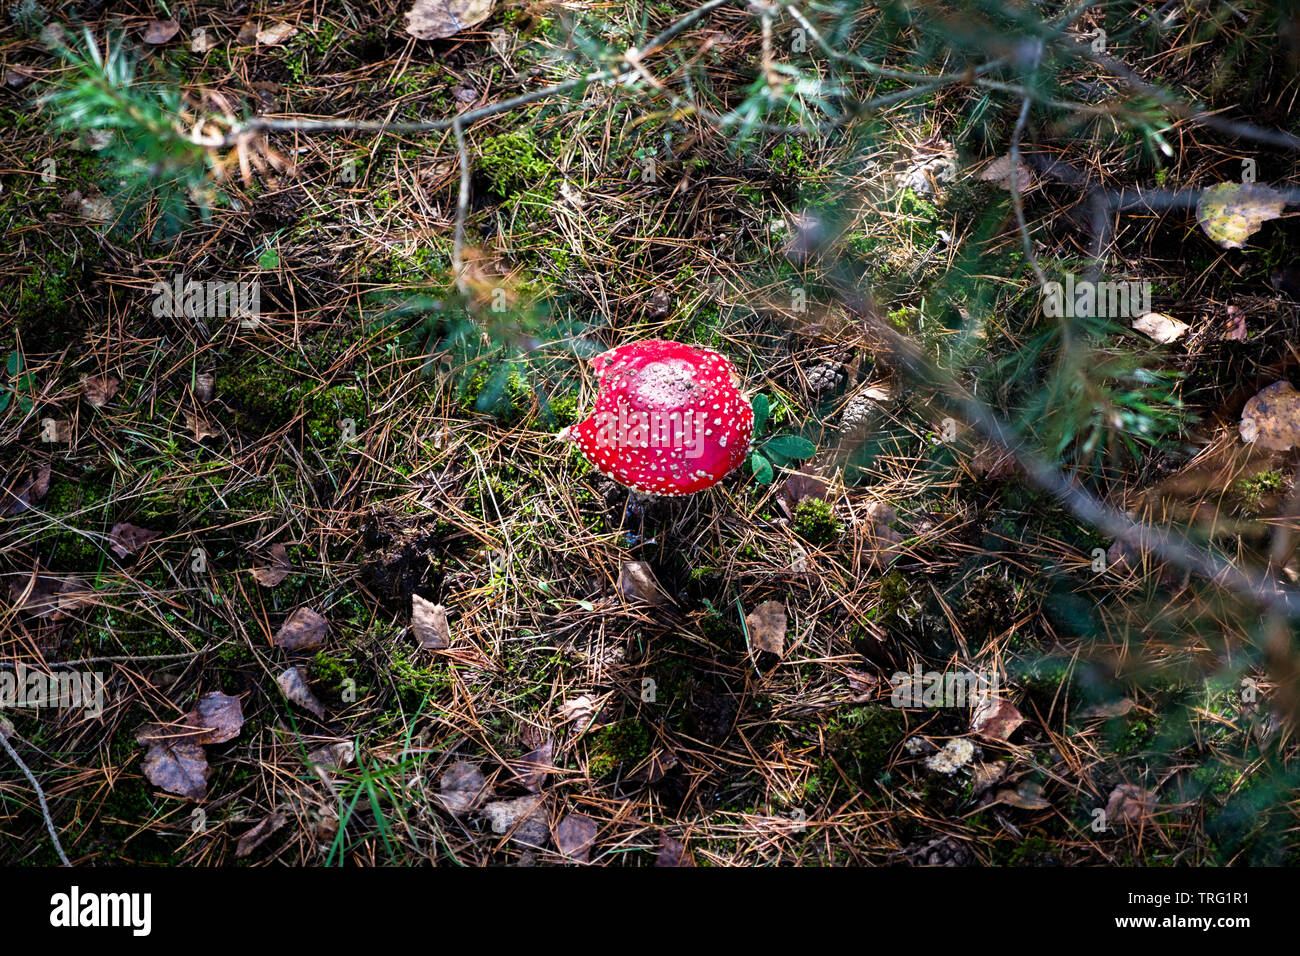 A fly agaric mushroom in the forest, Amanita muscaria Stock Photo